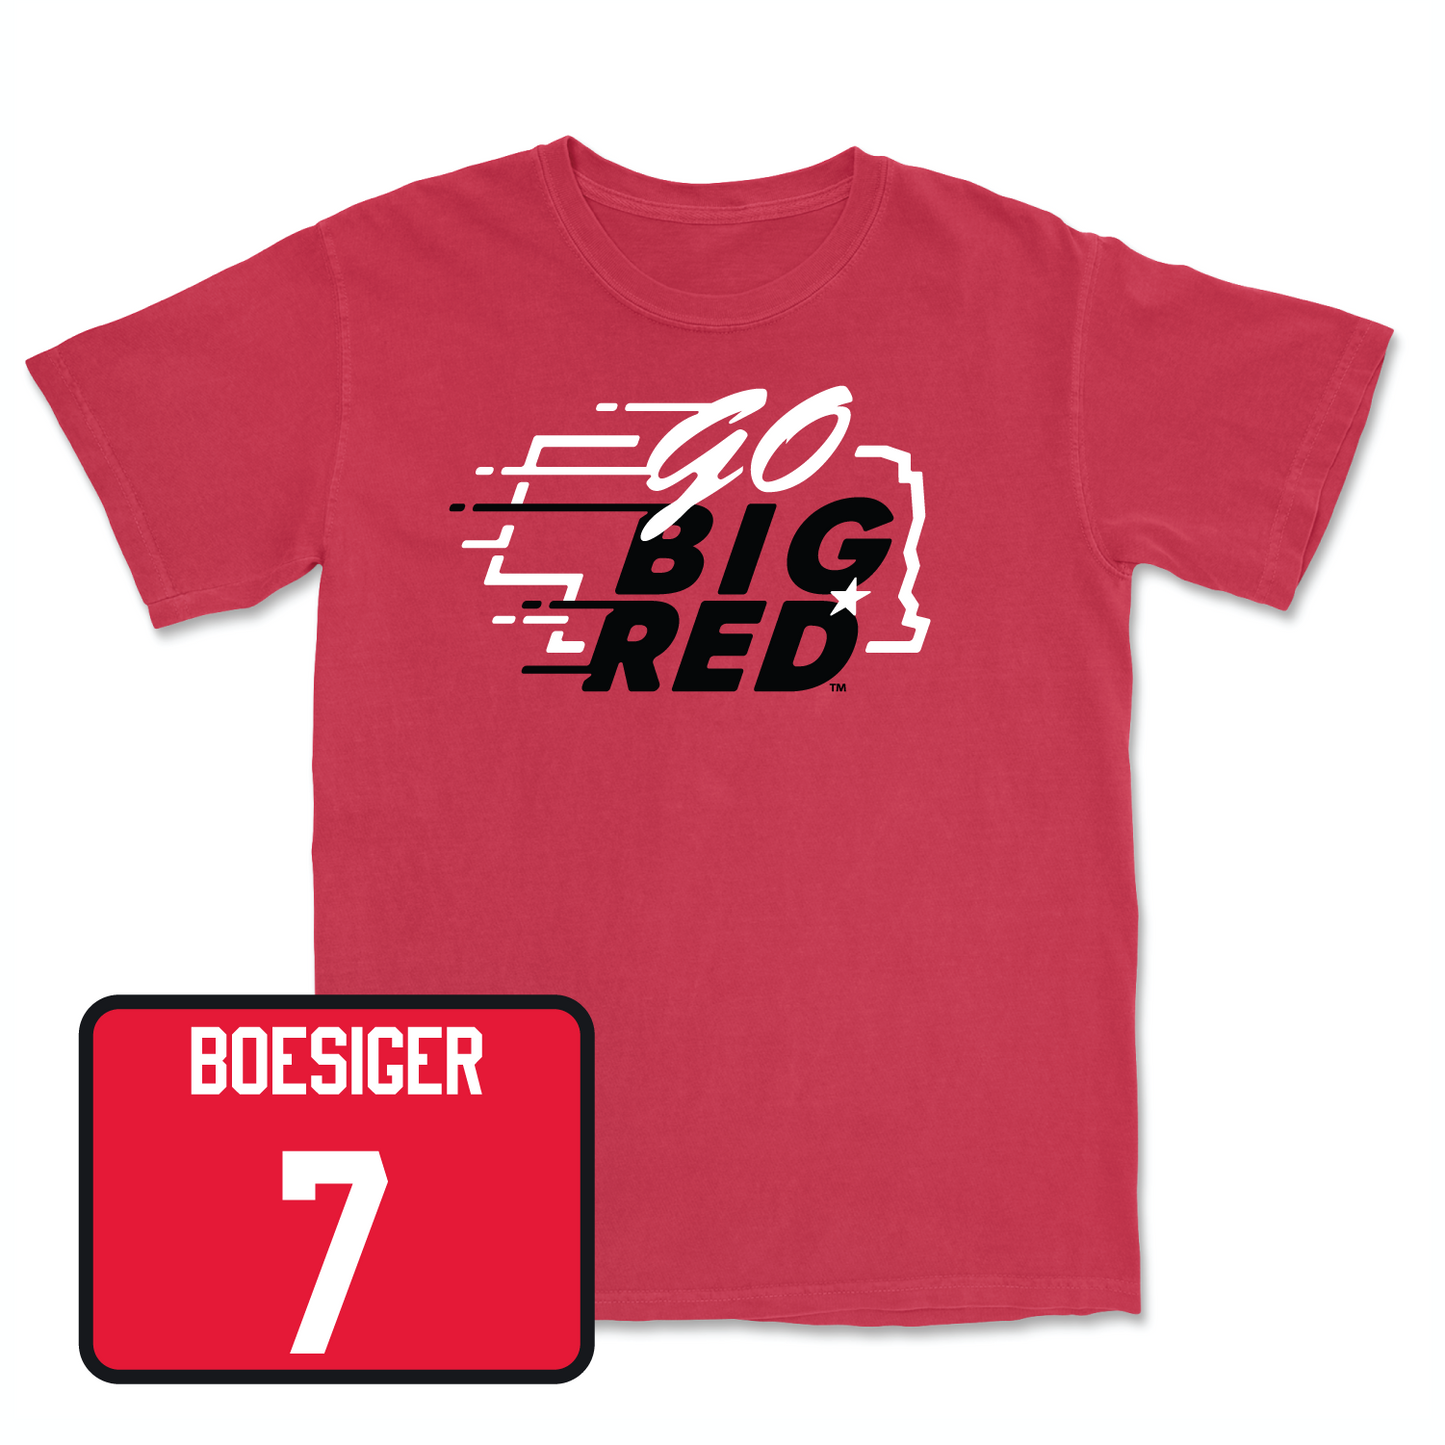 Red Women's Volleyball GBR Tee X-Large / Maisie Boesiger | #7